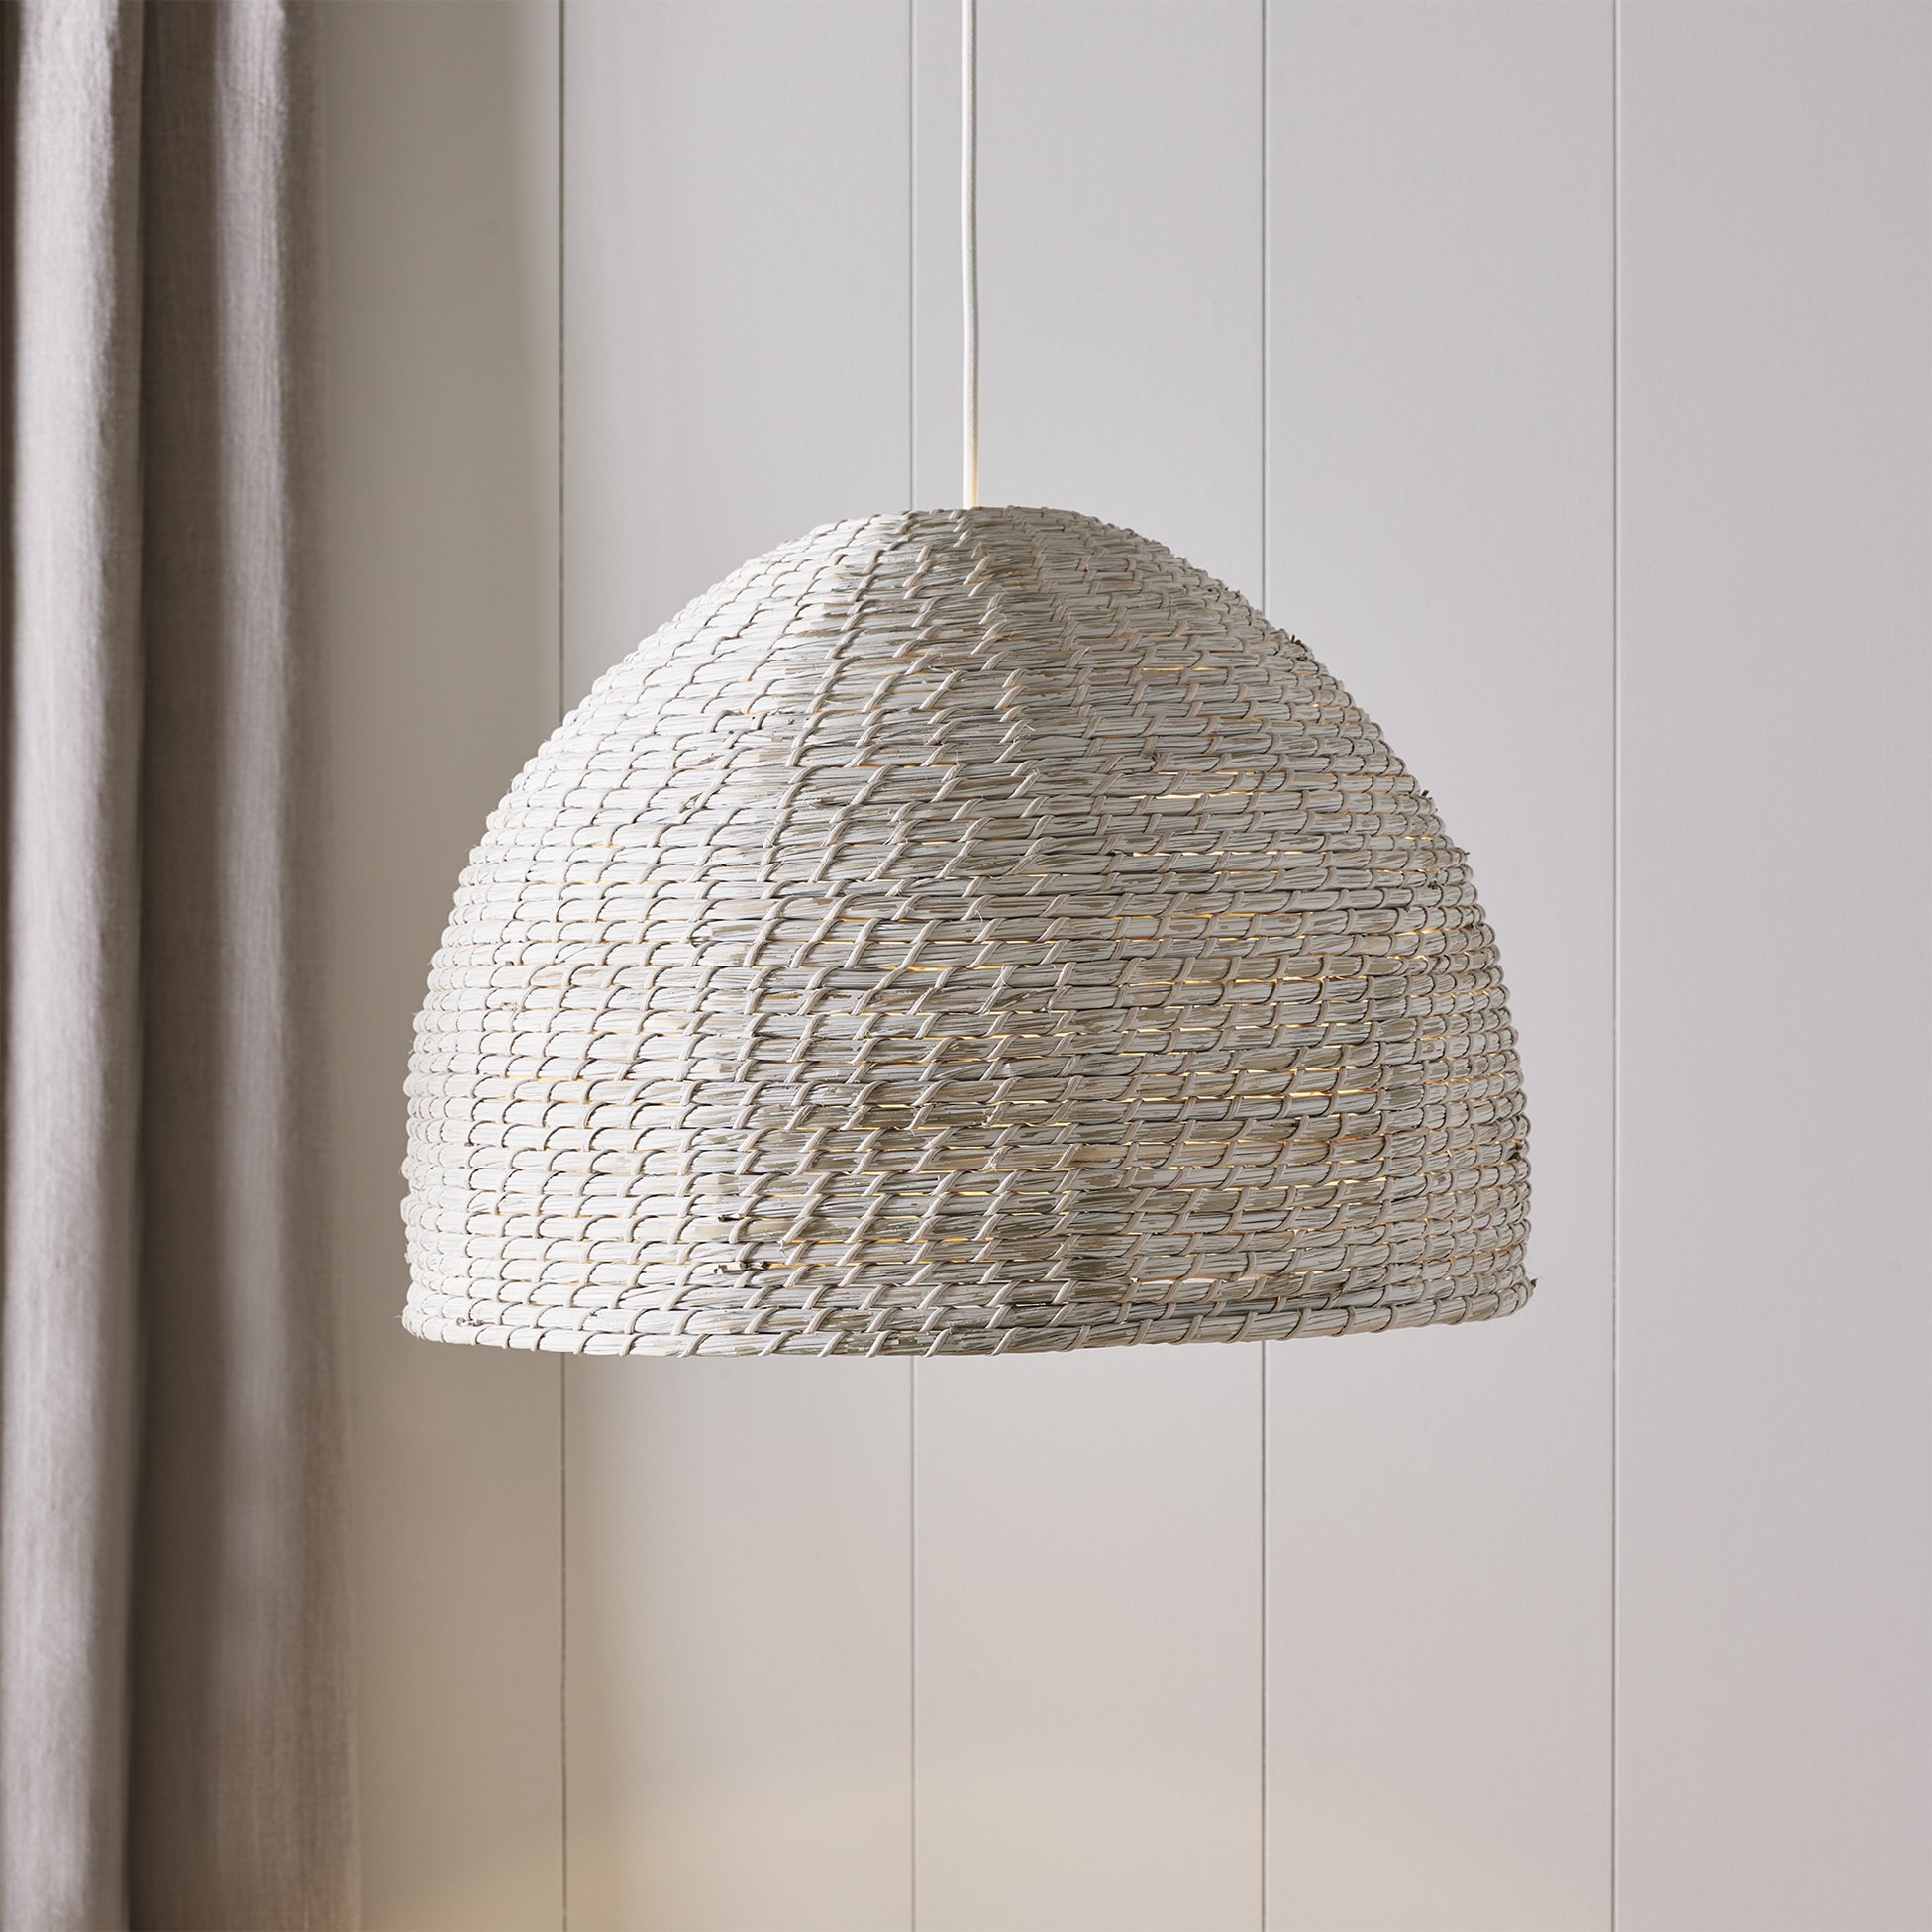 Mawes Ceiling Shade Lights, White Wicker Lampshade